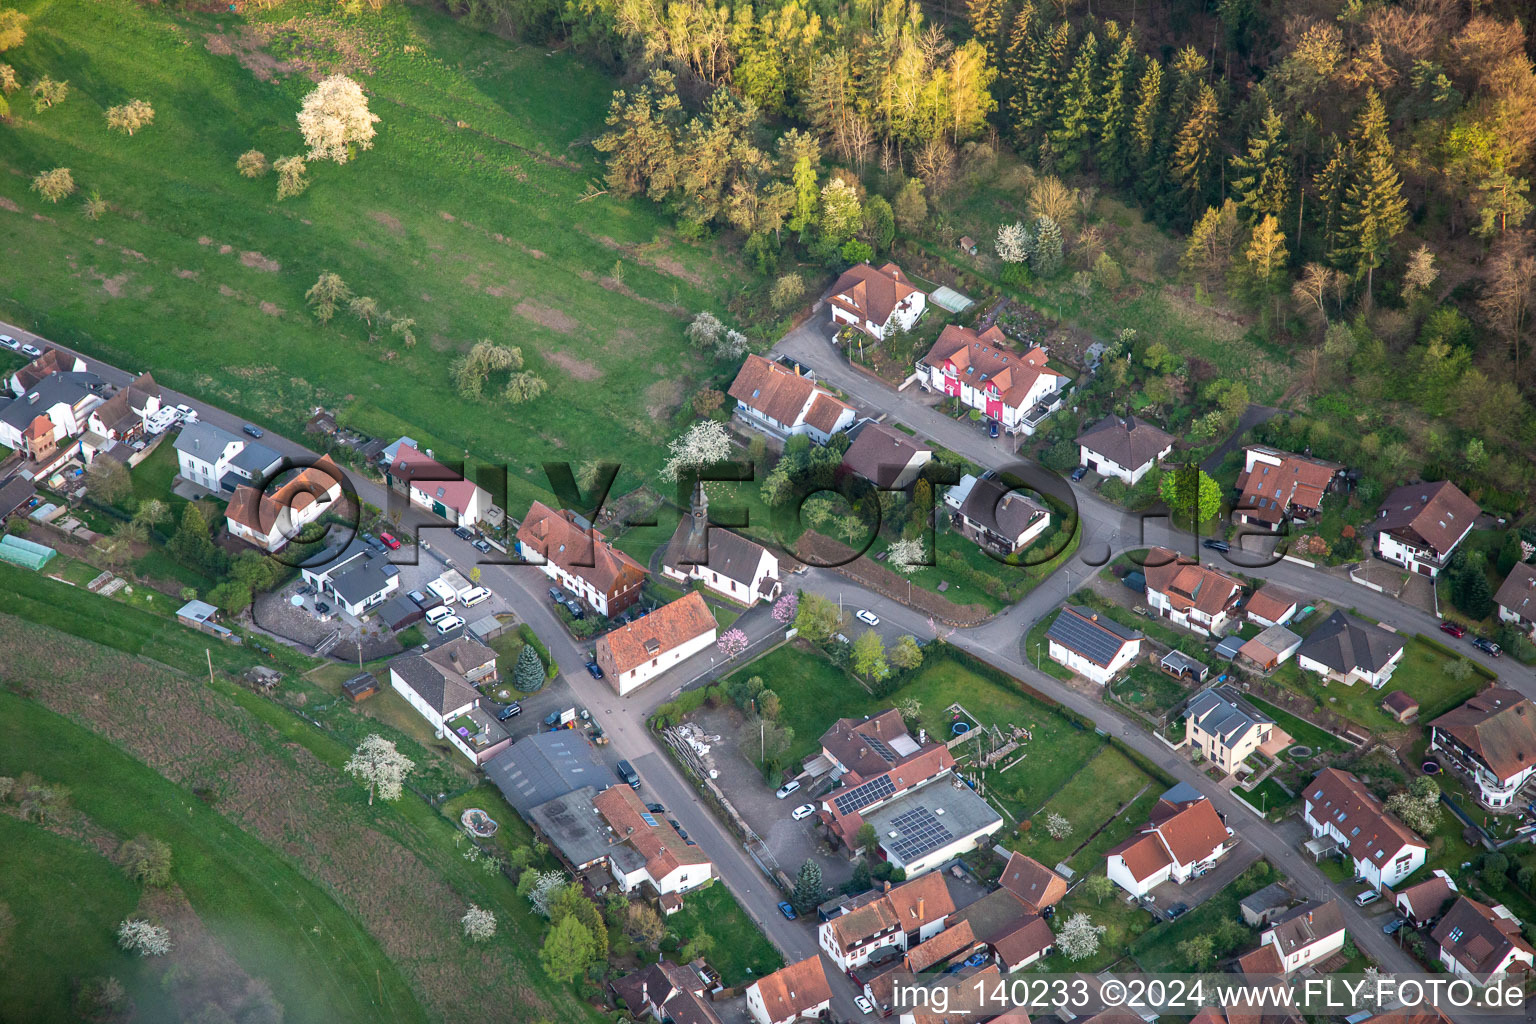 Aerial photograpy of From northwest in Böllenborn in the state Rhineland-Palatinate, Germany